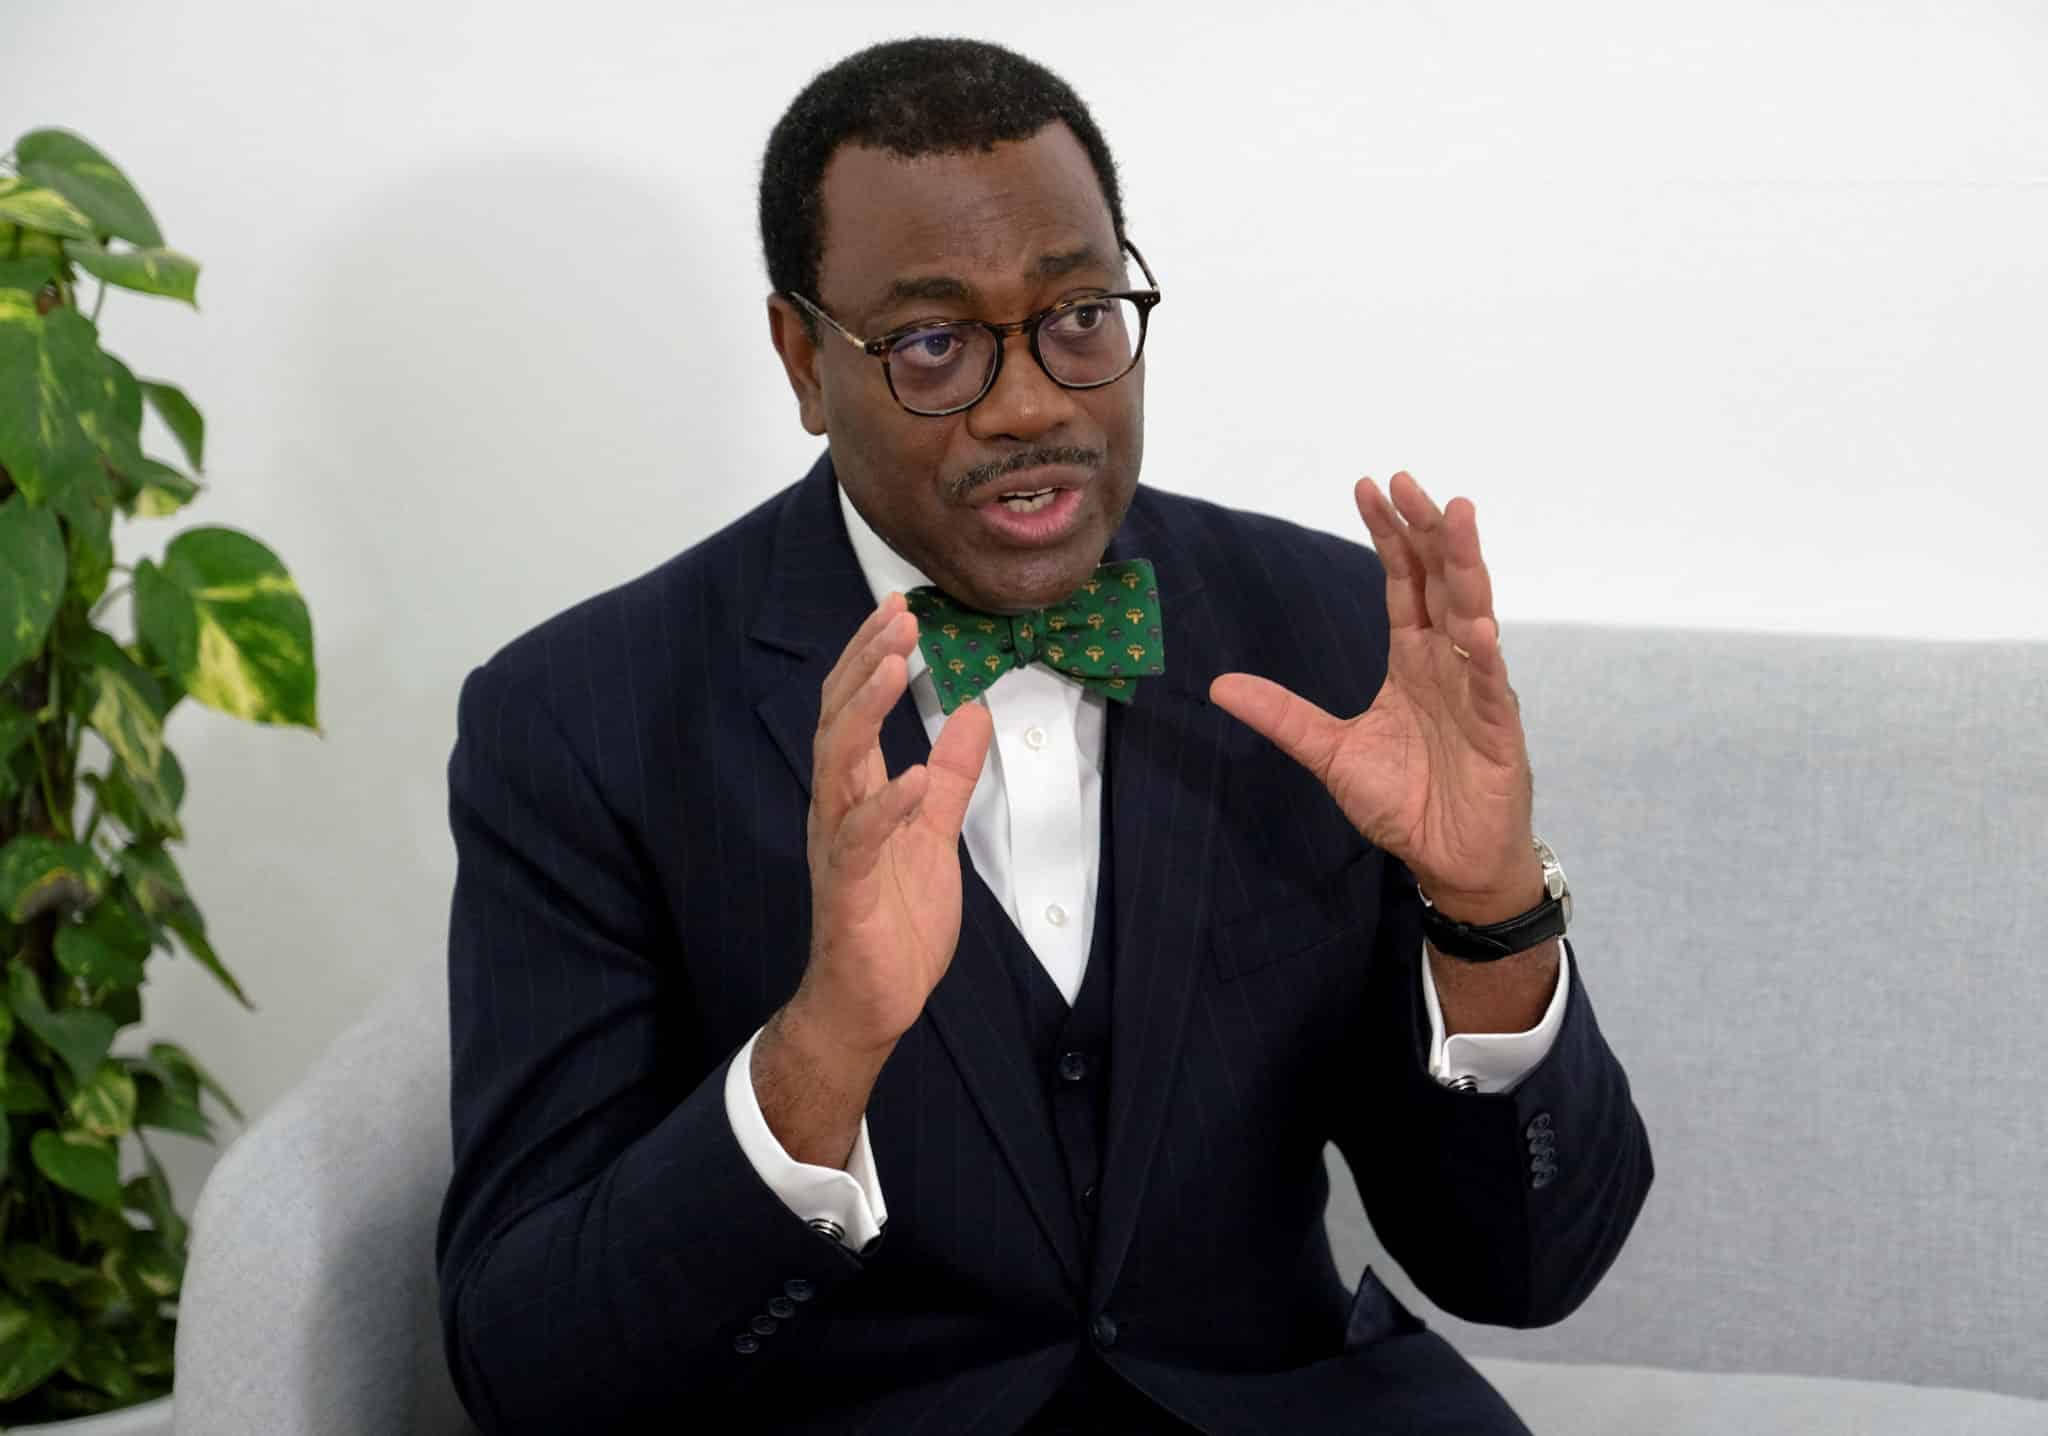 Adesina: Africa Must Take Urgent Action to Solve Challenges and End Poverty